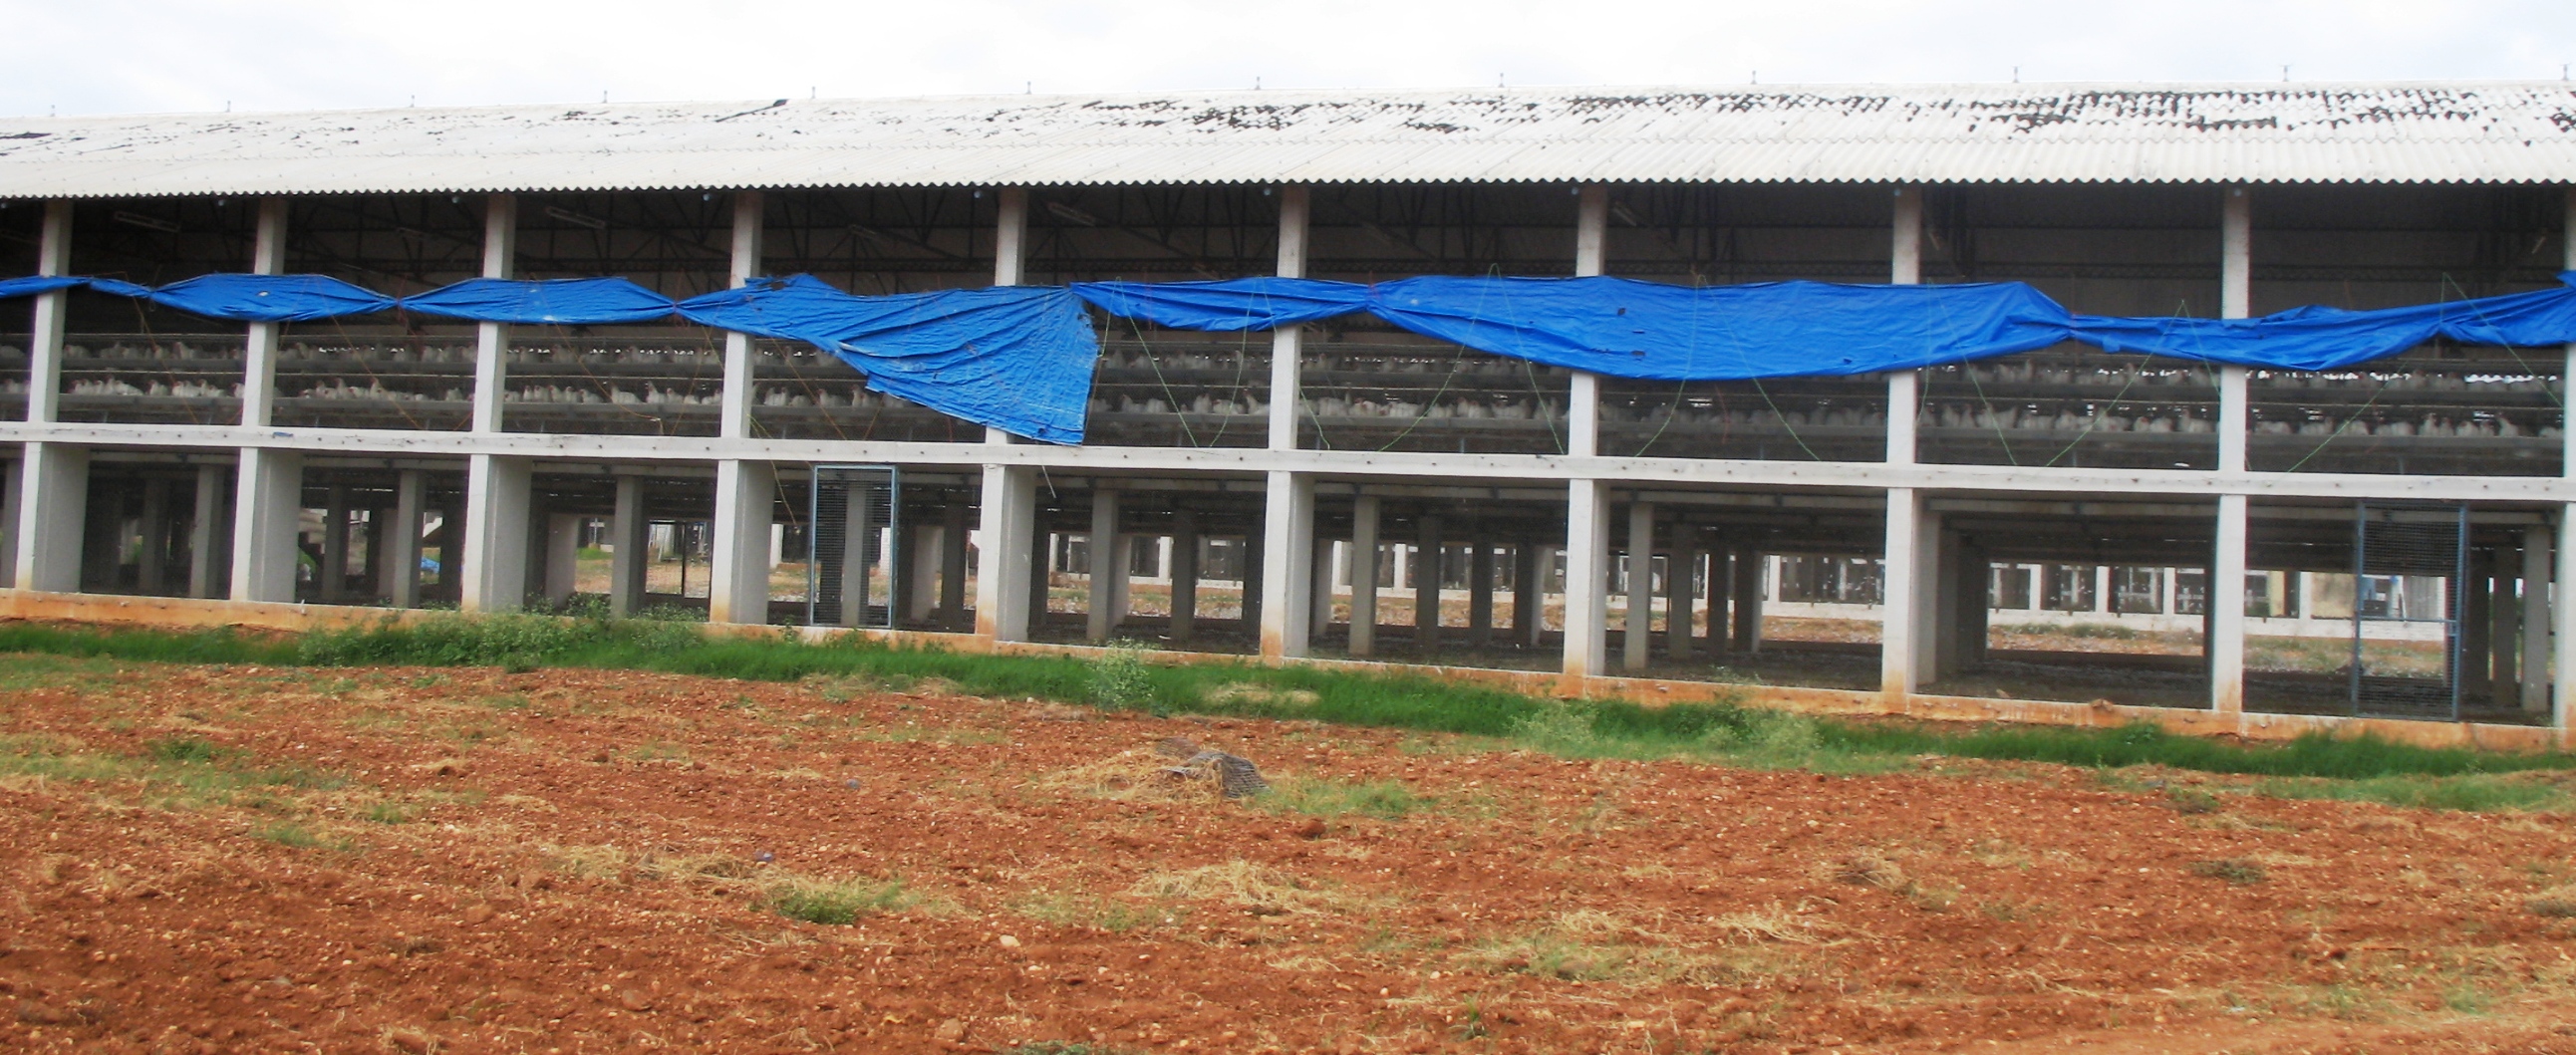 poultry_housing_002